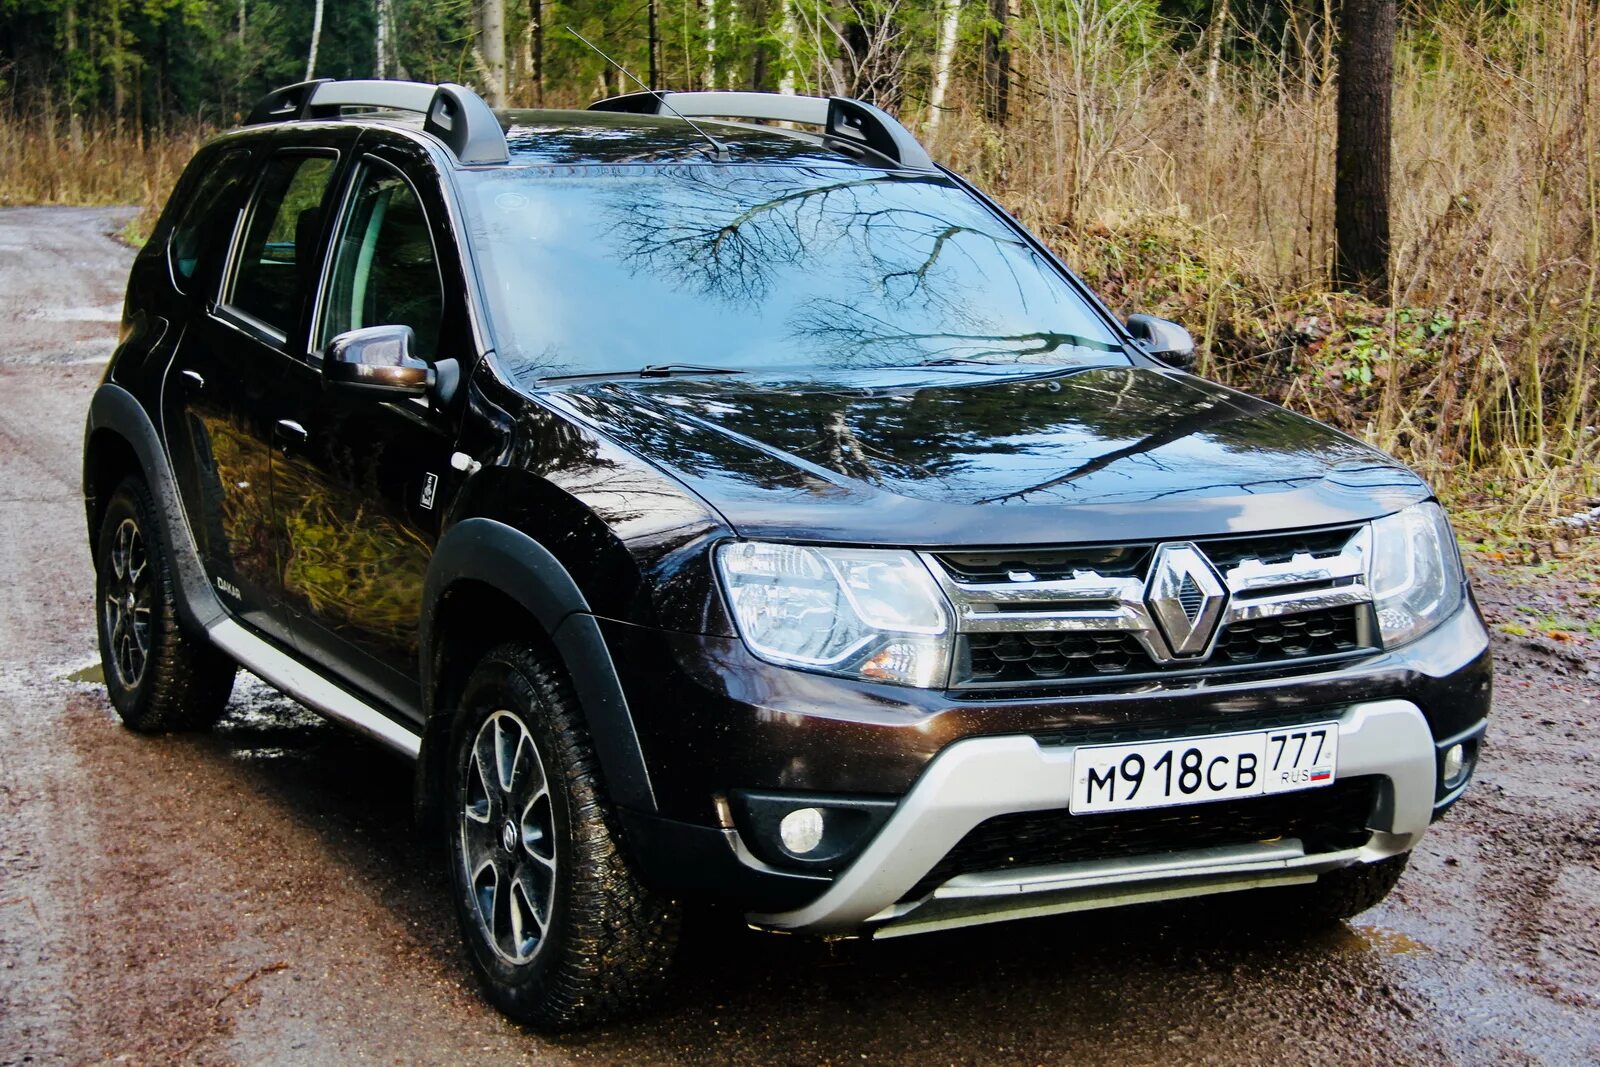 Renault Duster. Renault Duster 2017. Рено Дастер Дакар. Рено Дастер 2016 20. Рено дастер 2018 2.0